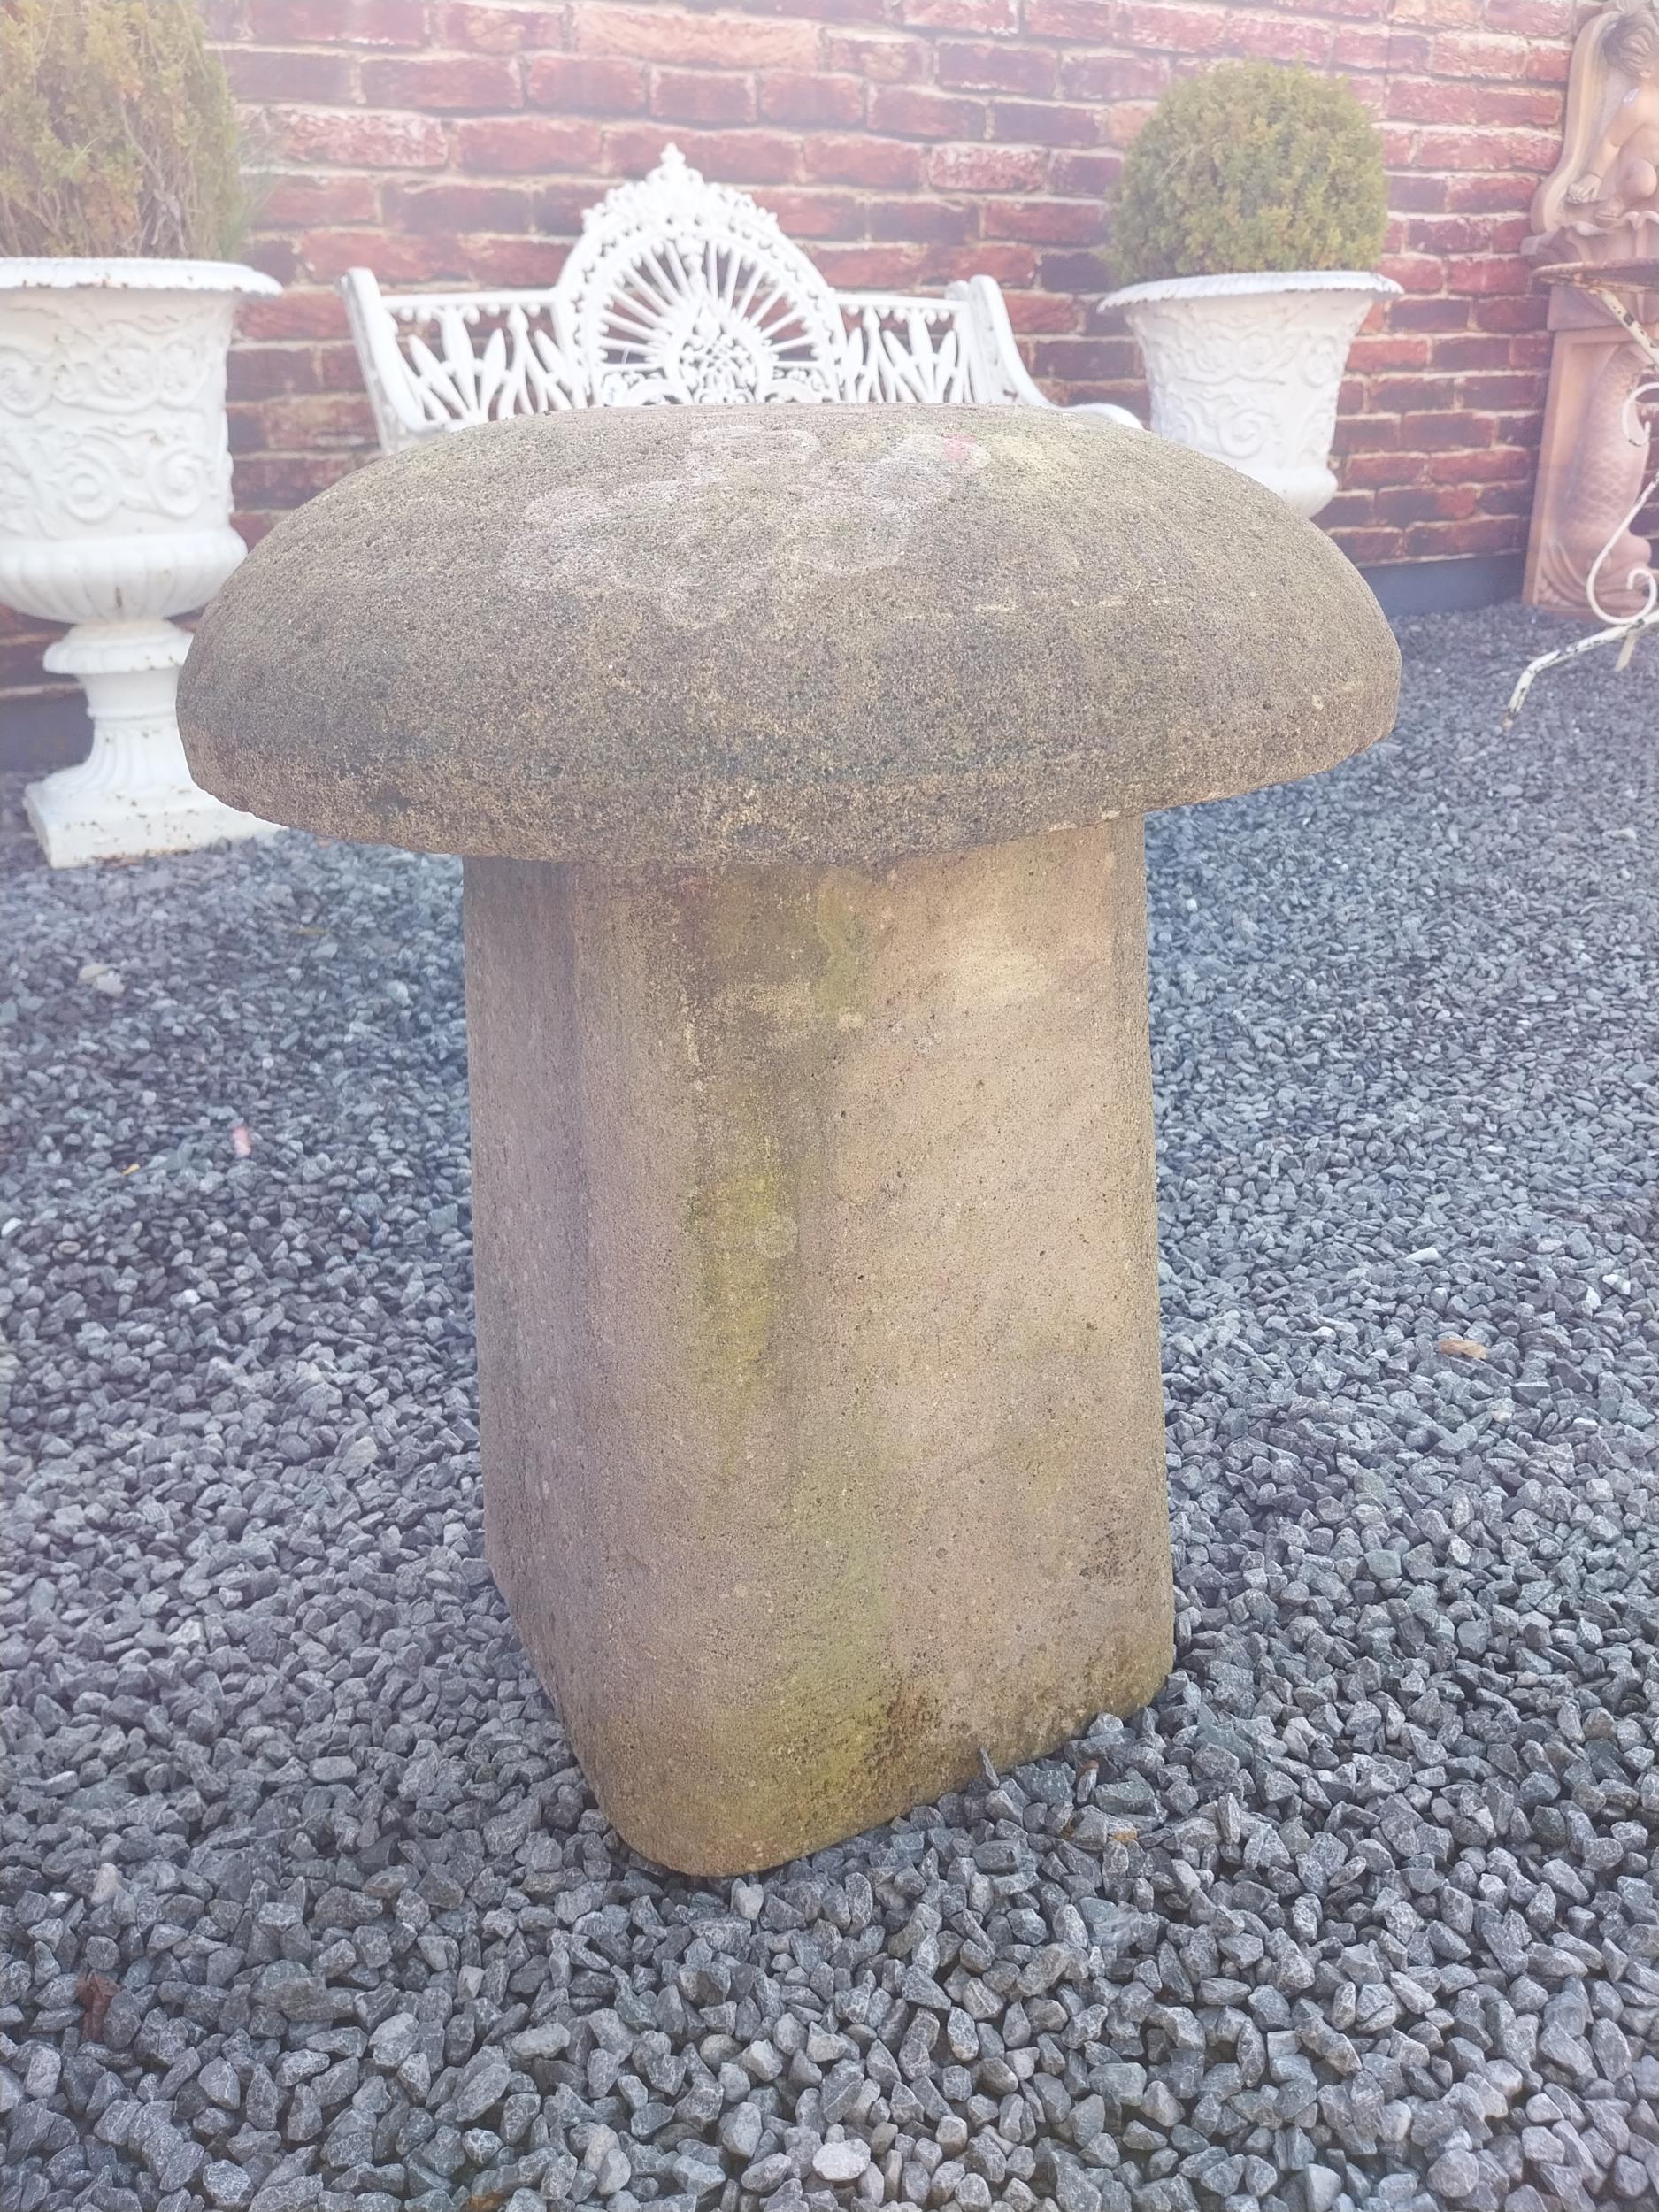 Sandstone staddle stone in the 19th C. style {55 cm H x 49 cm Dia.}. (NOT AVAILABLE TO VIEW IN